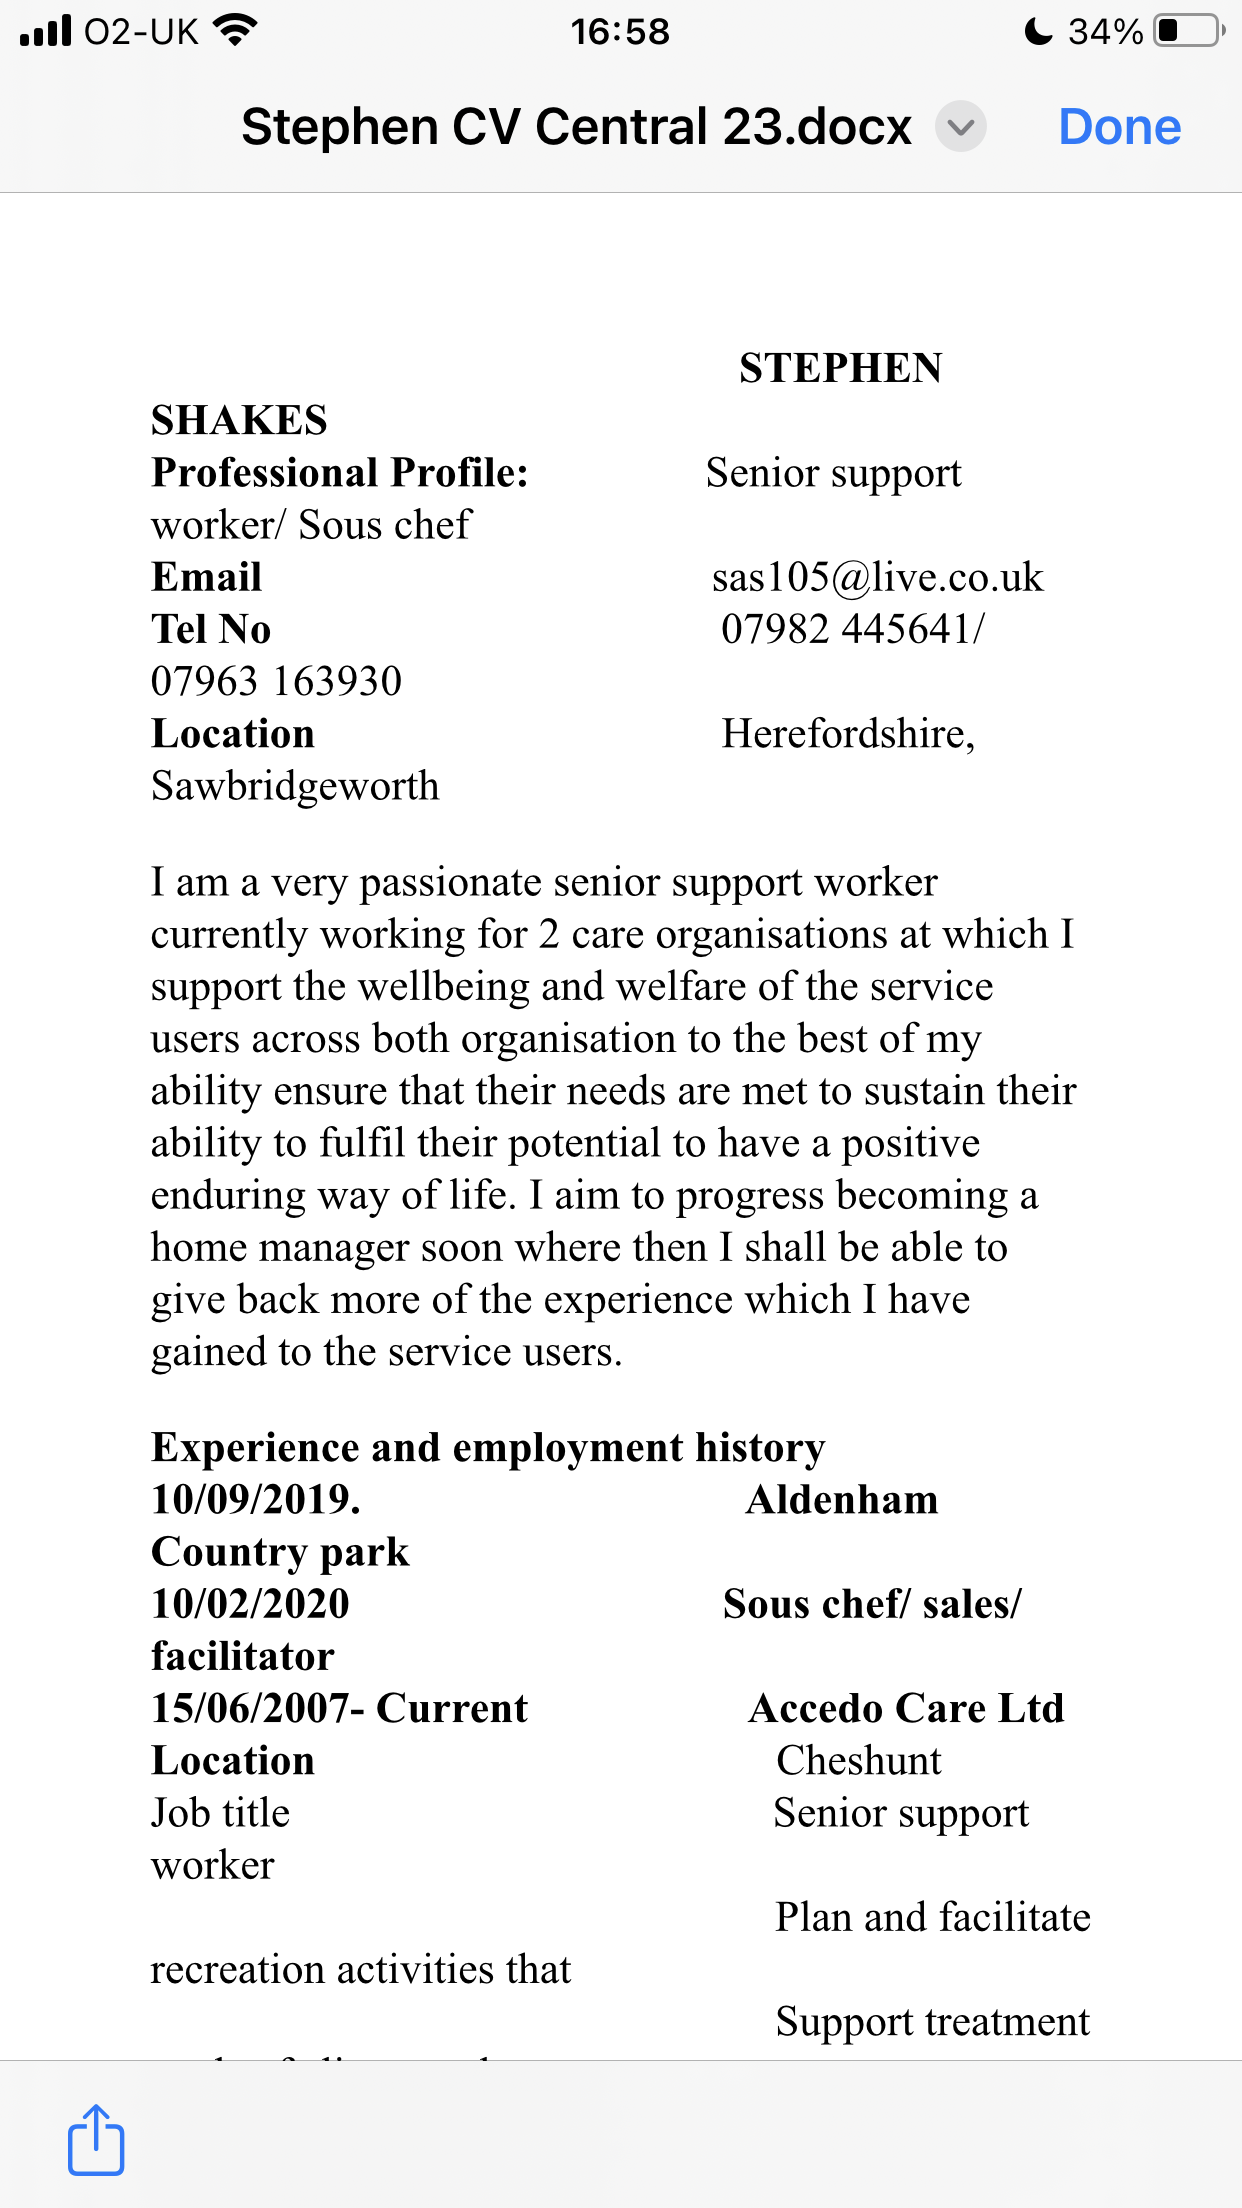 all 02-UK 2° 16:58 CC 3%@

Stephen CV Central 23.docx + Done

STEPHEN
SHAKES
Professional Profile: Senior support
worker/ Sous chef
Email sas105@live.co.uk
Tel No 07982 445641/
07963 163930
Location Herefordshire,
Sawbridgeworth

I am a very passionate senior support worker
currently working for 2 care organisations at which I
support the wellbeing and welfare of the service
users across both organisation to the best of my
ability ensure that their needs are met to sustain their
ability to fulfil their potential to have a positive
enduring way of life. I aim to progress becoming a
home manager soon where then I shall be able to
give back more of the experience which I have
gained to the service users.

Experience and employment history

10/09/2019. Aldenham
Country park

10/02/2020 Sous chef/ sales/
facilitator

15/06/2007- Current Accedo Care Ltd
Location Cheshunt

Job title Senior support
worker

Plan and facilitate
recreation activities that
Support treatment